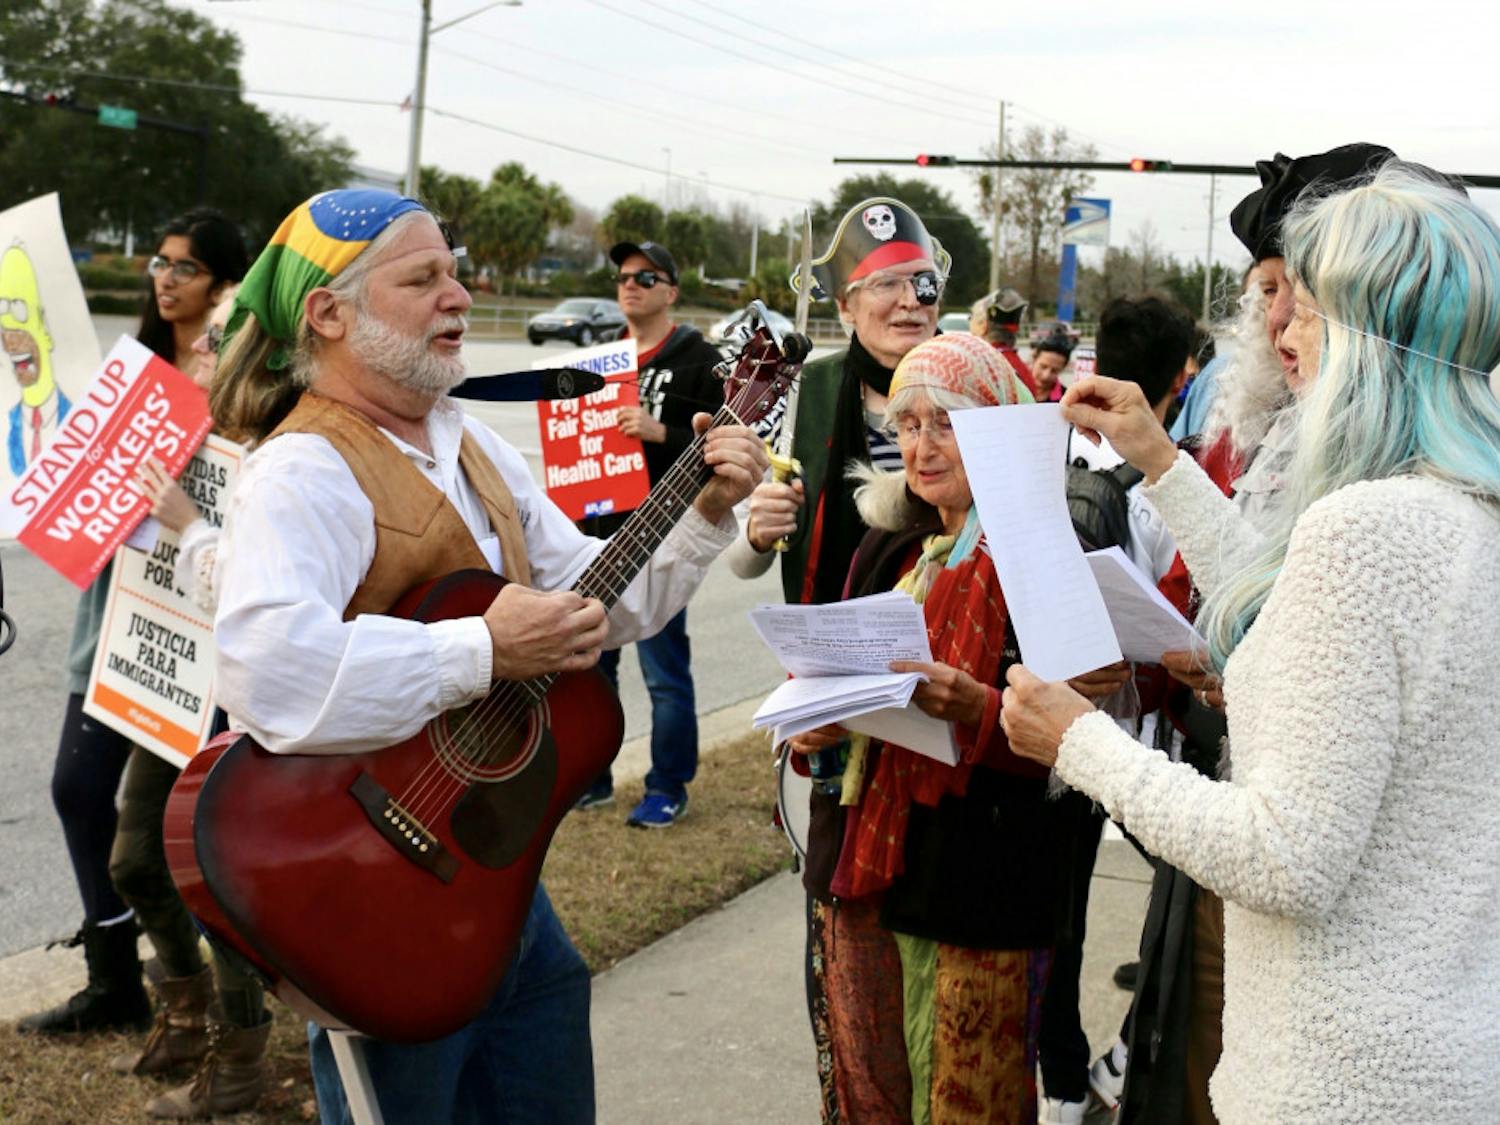 Lee Malis, 58, strums his guitar and sings along with other protesters during the Rep. Ted Yoho Pirate Protest on Friday. Malis wrote a pirate-themed song specifically for the protest which he sang with the protesters around him.